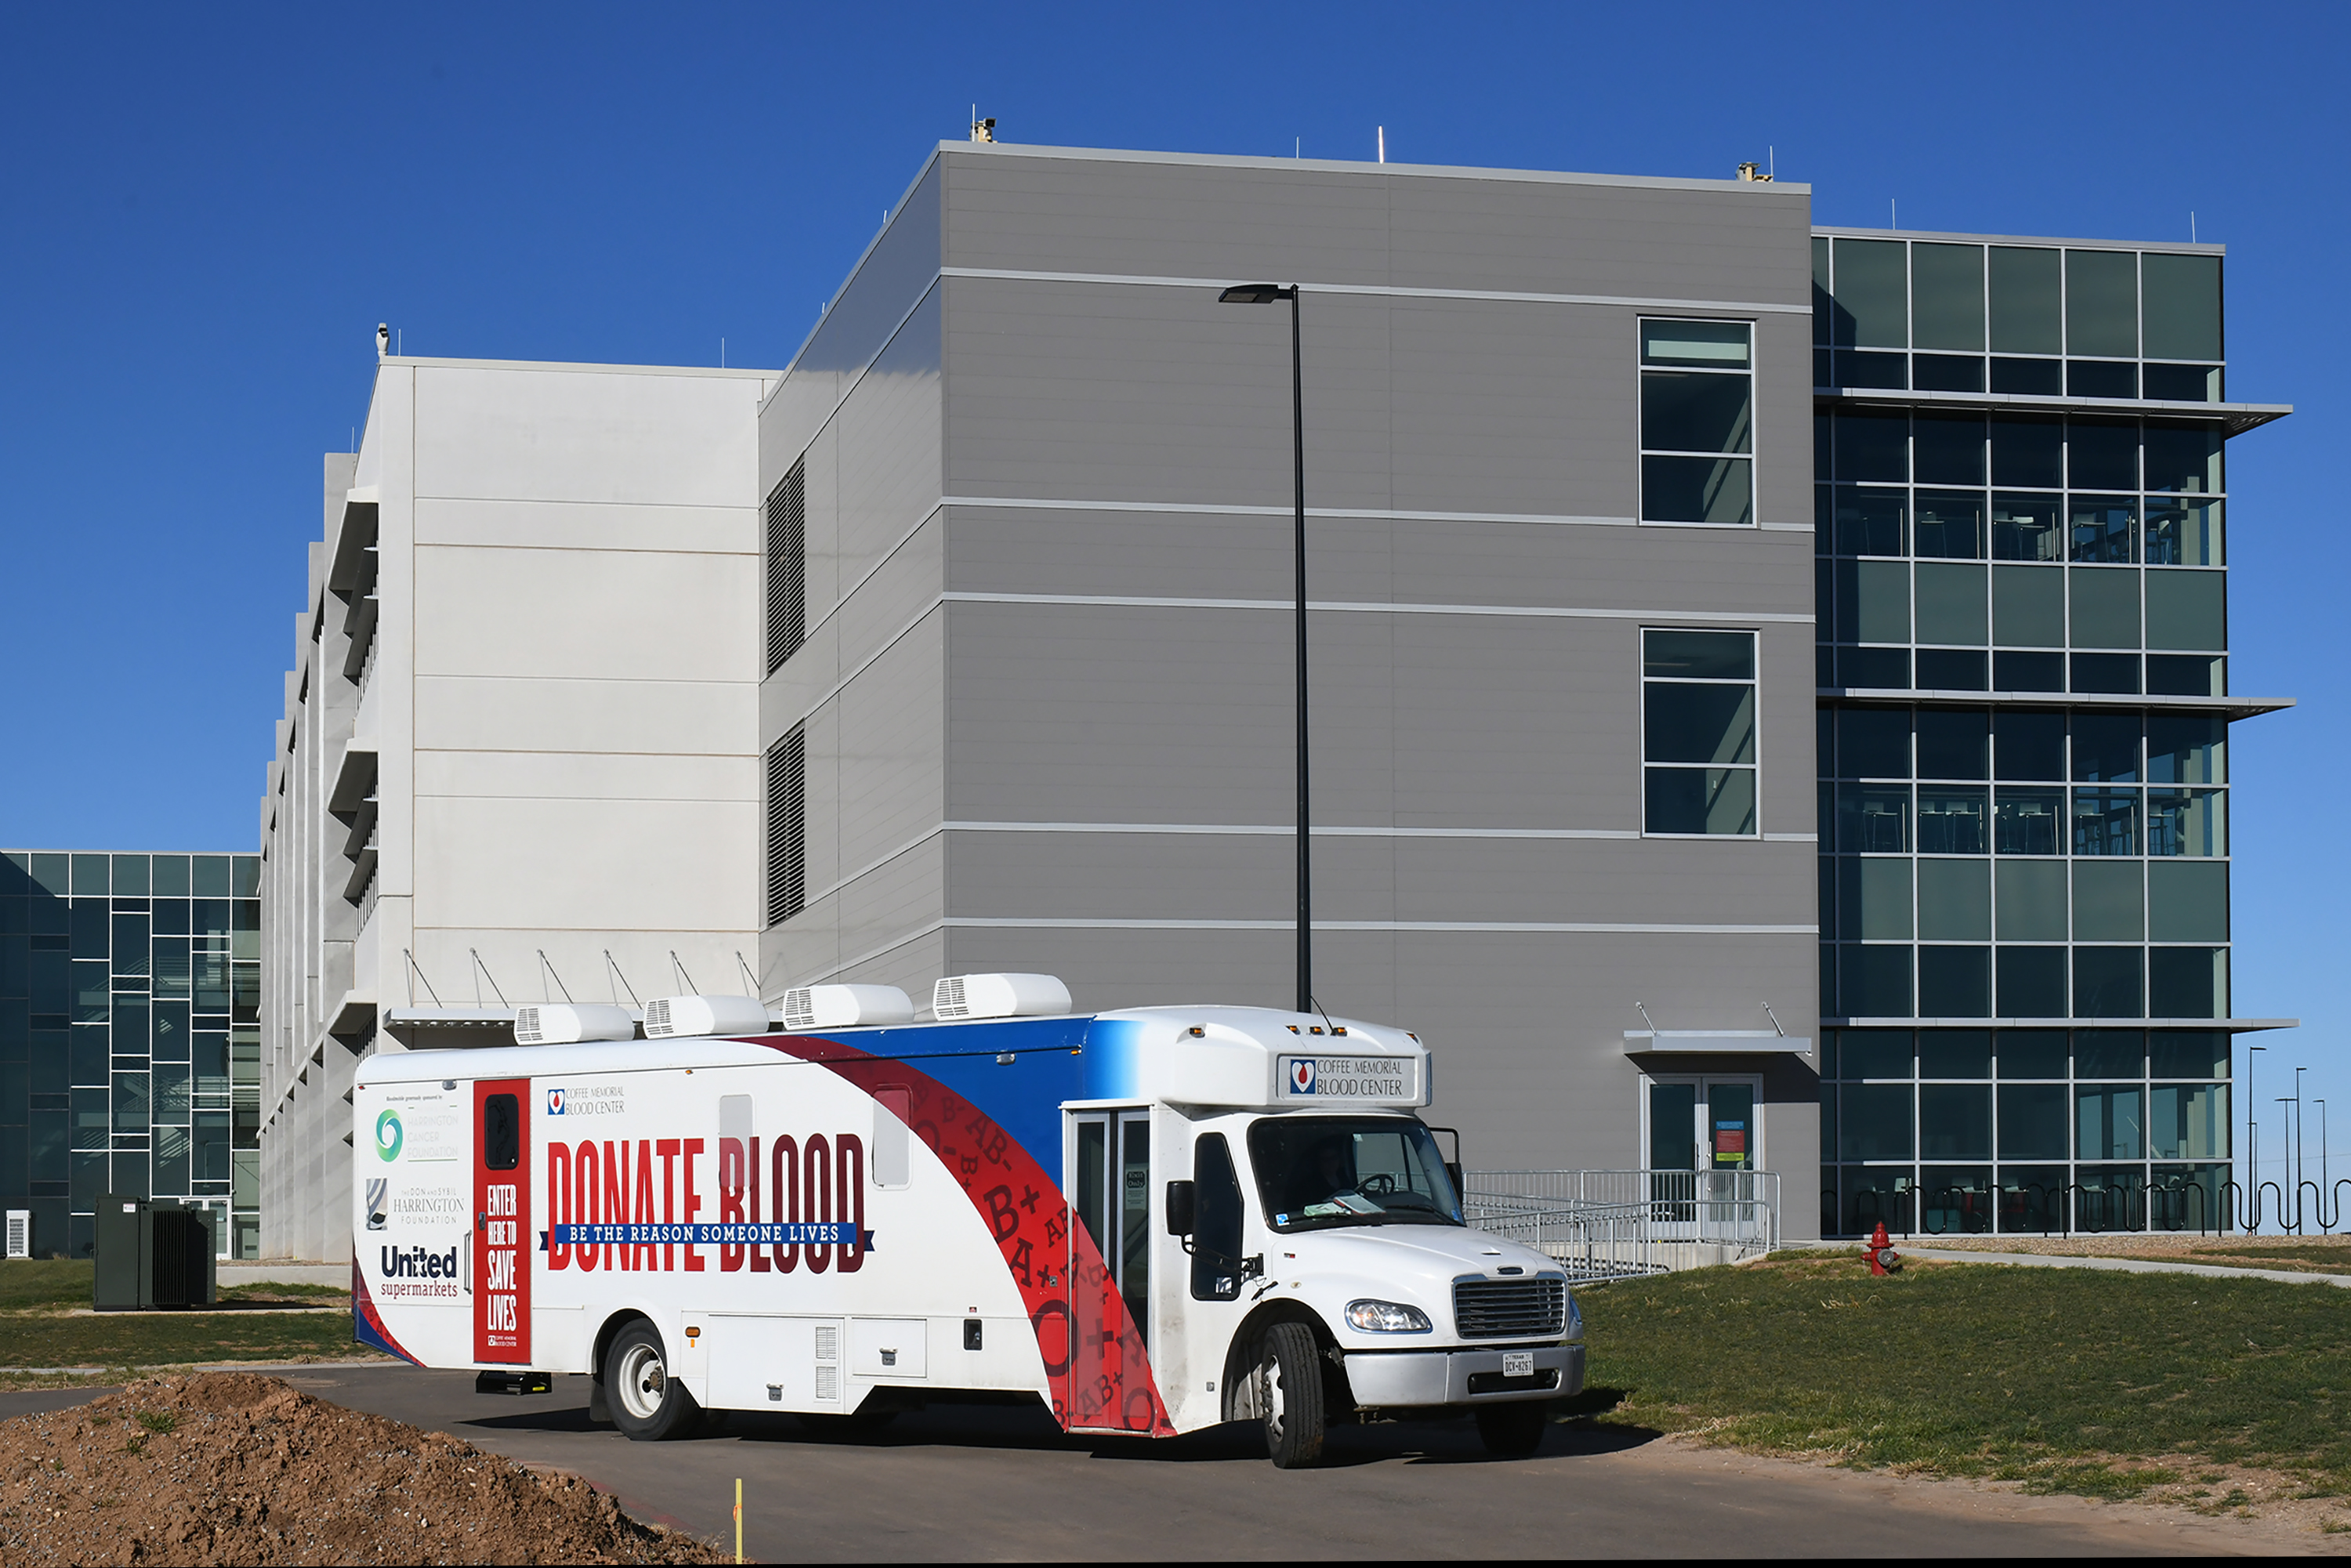 Pantex hosts the bloodmobile approximately every two weeks